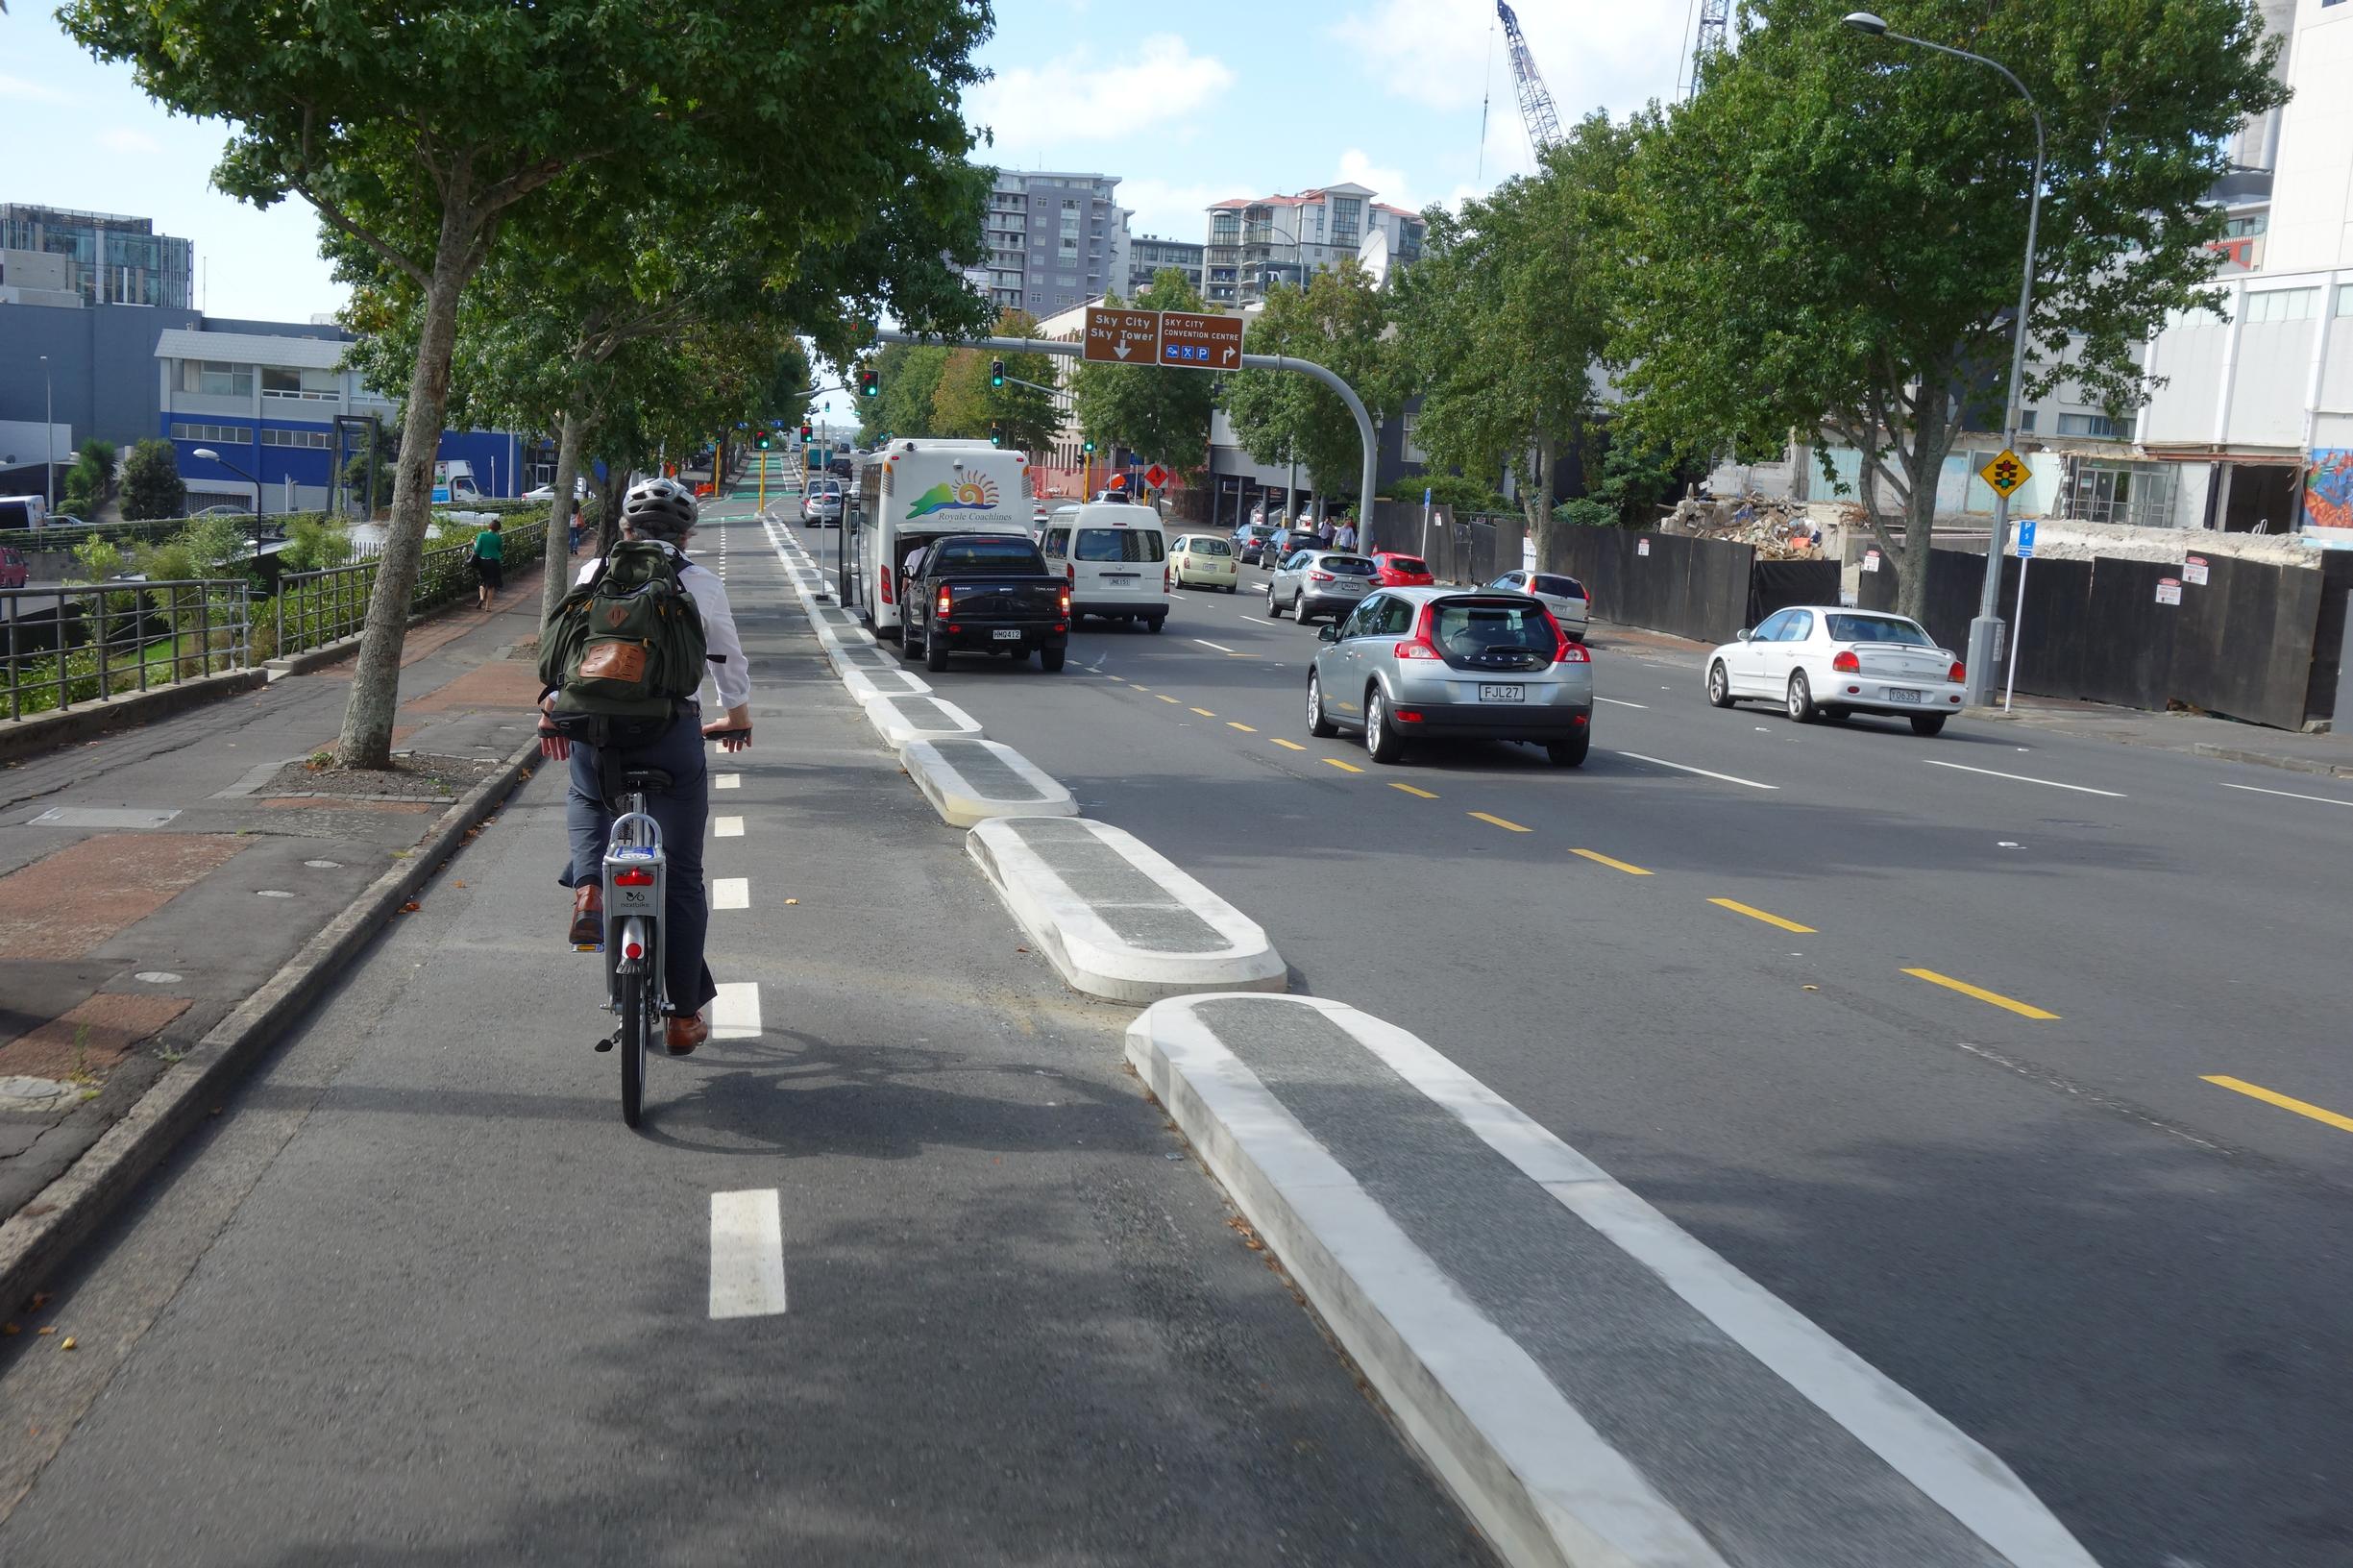 Cycling in Auckland is represented by new separated bikeway infrastructure largely added in the 2010s, such as the Lightpath / Nelson Street cycleway into the City Centre, which are credited with being part of the reason cycling counters have experienced large annual growth over the last years. Image courtesy Schwede66 CC